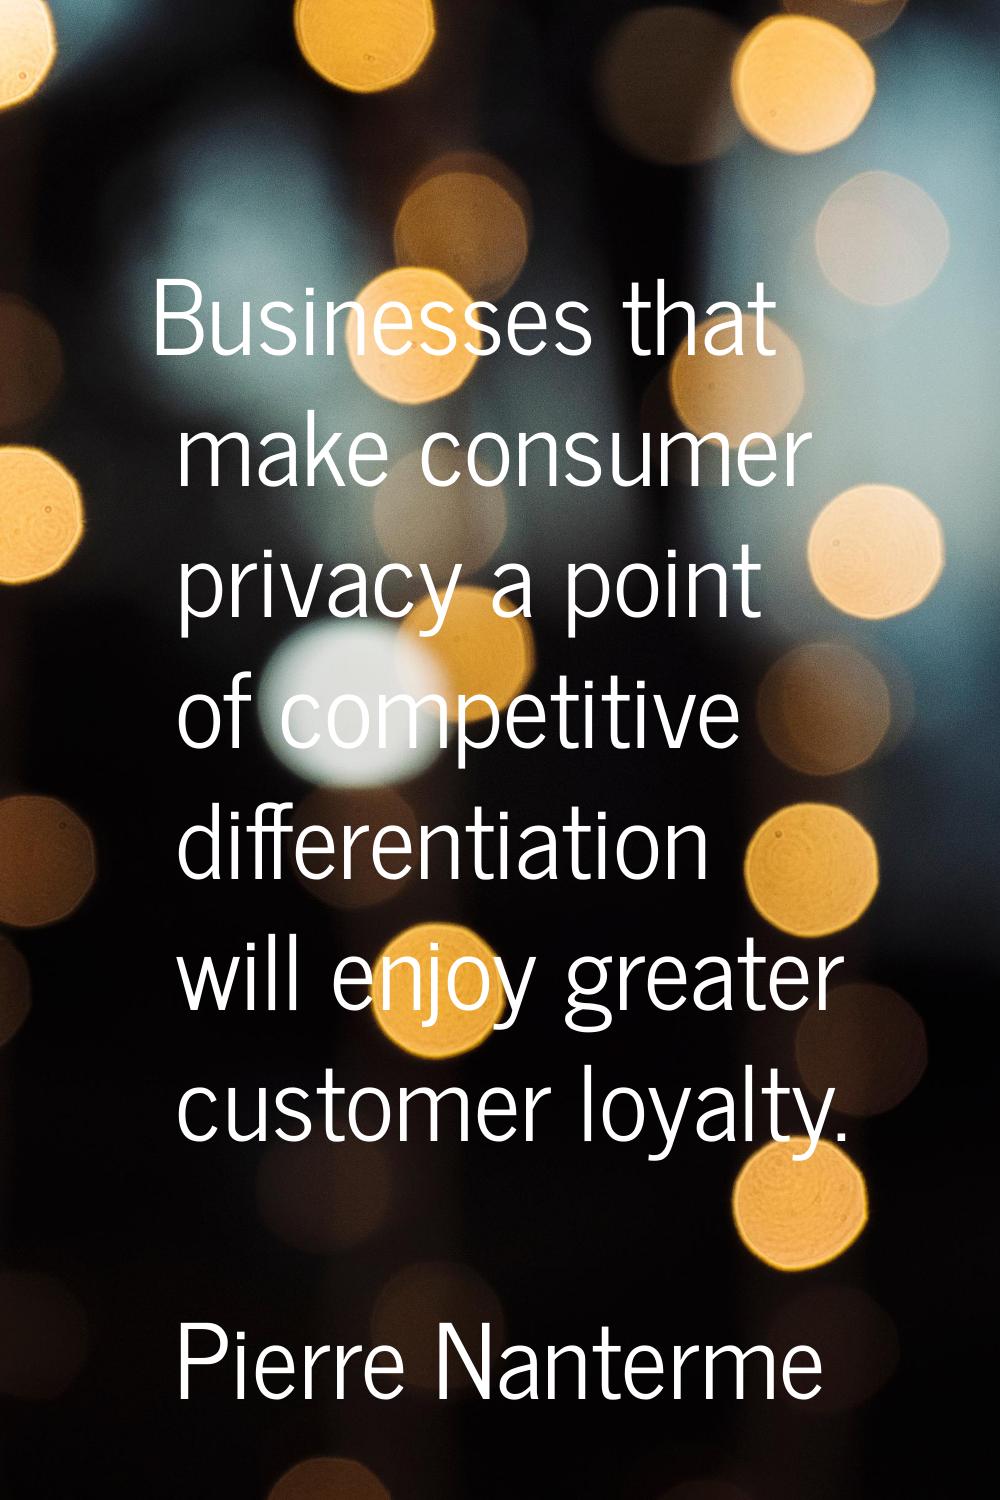 Businesses that make consumer privacy a point of competitive differentiation will enjoy greater cus